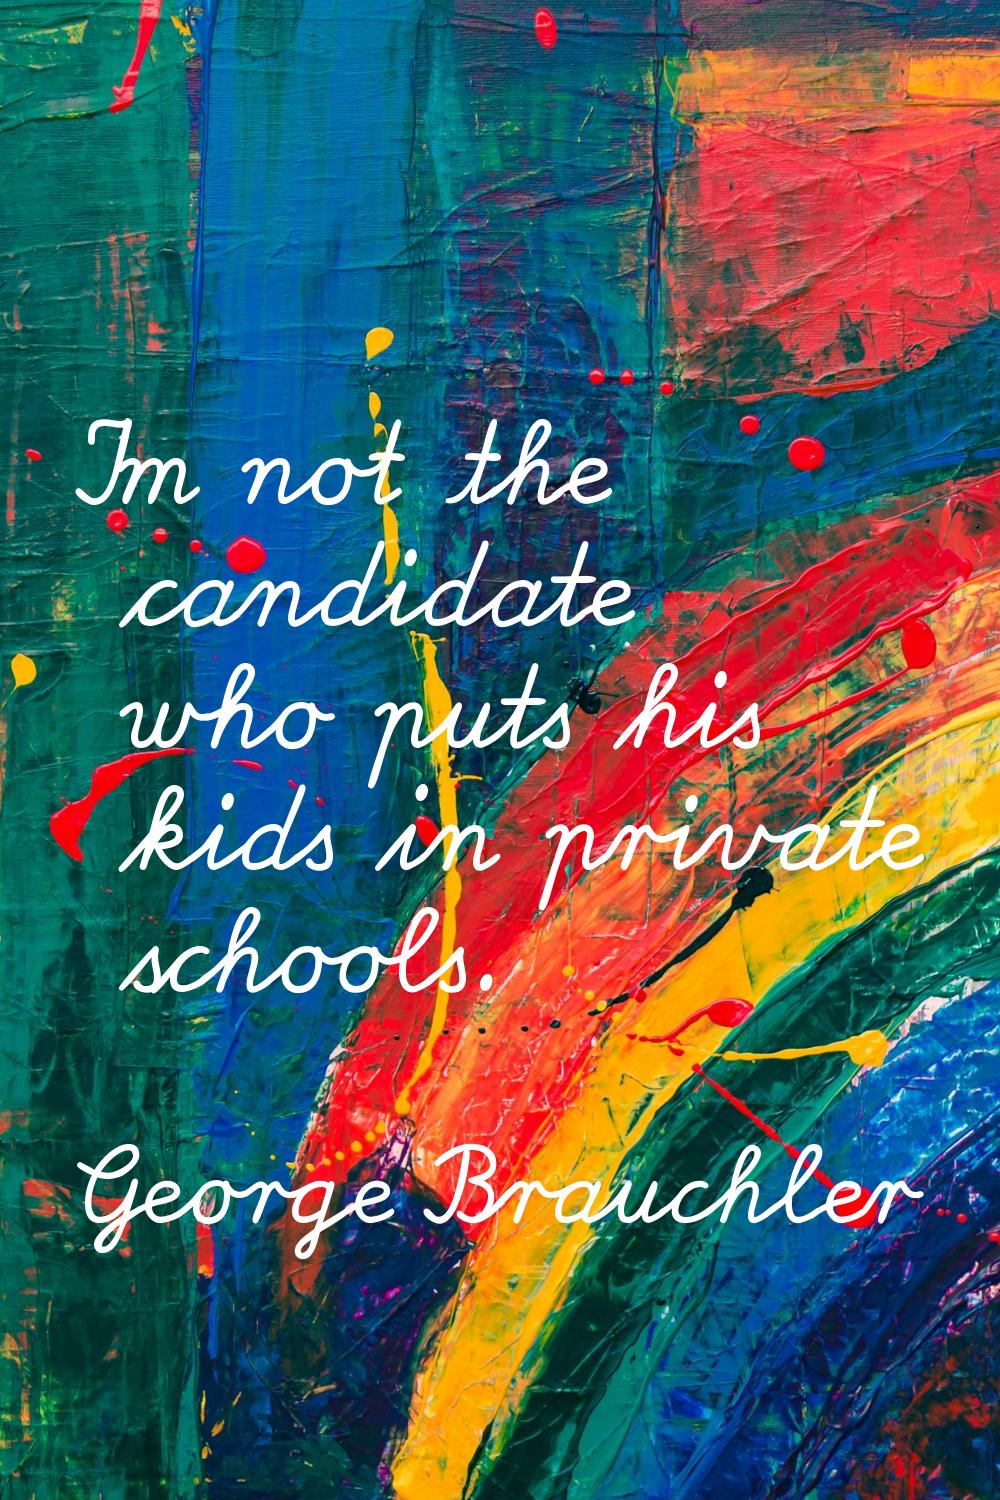 I'm not the candidate who puts his kids in private schools.